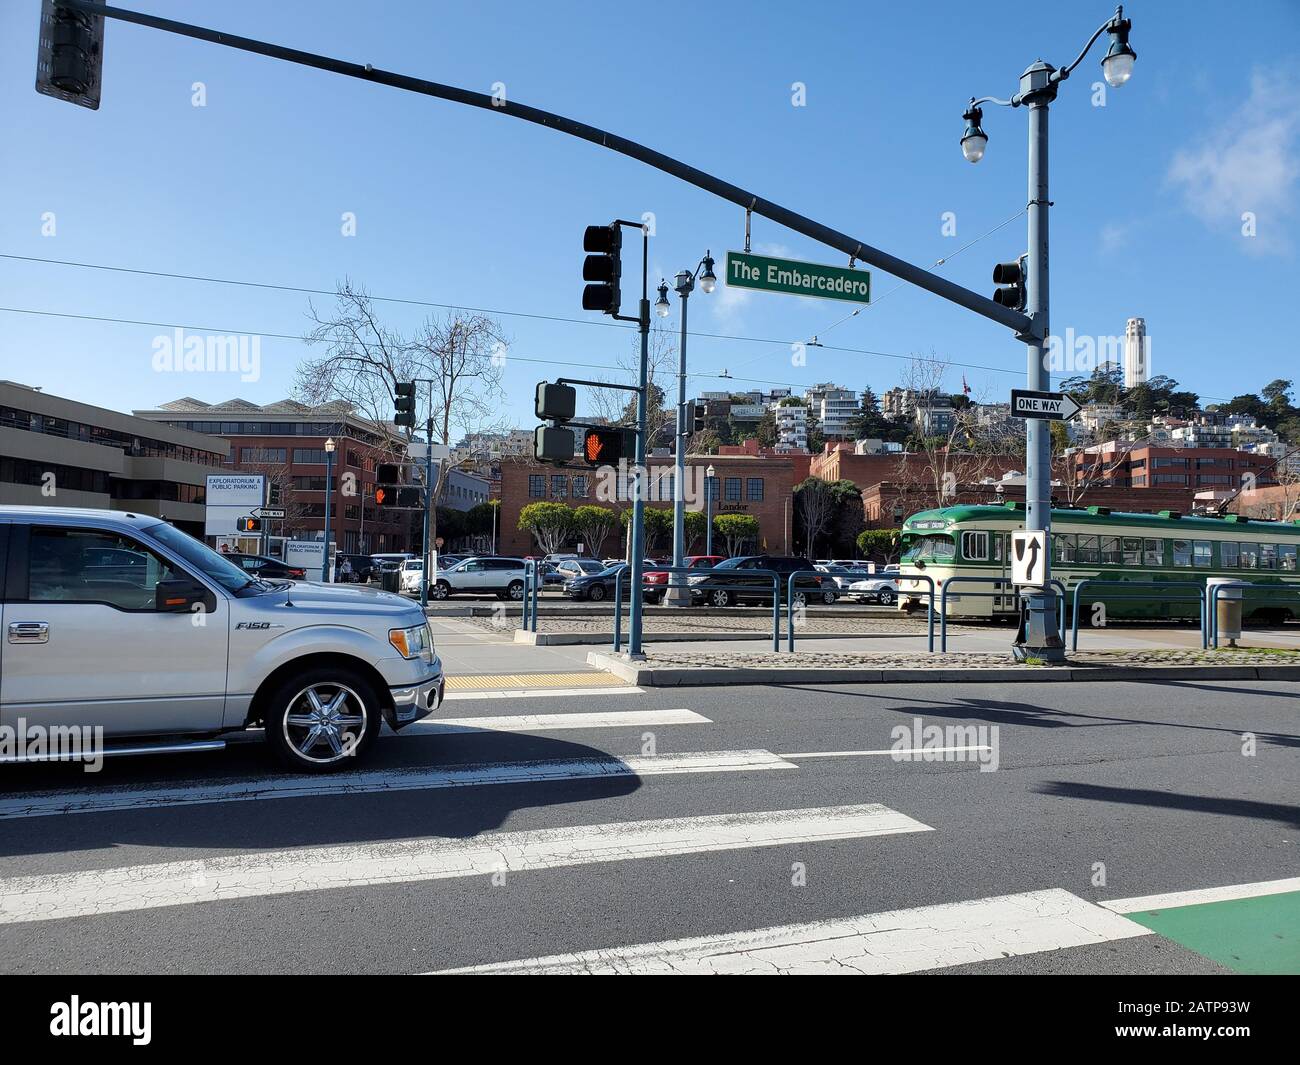 Road sign for the Embarcadero is visible in the Embarcadero neighborhood of San Francisco, California, January 26, 2020. () Stock Photo